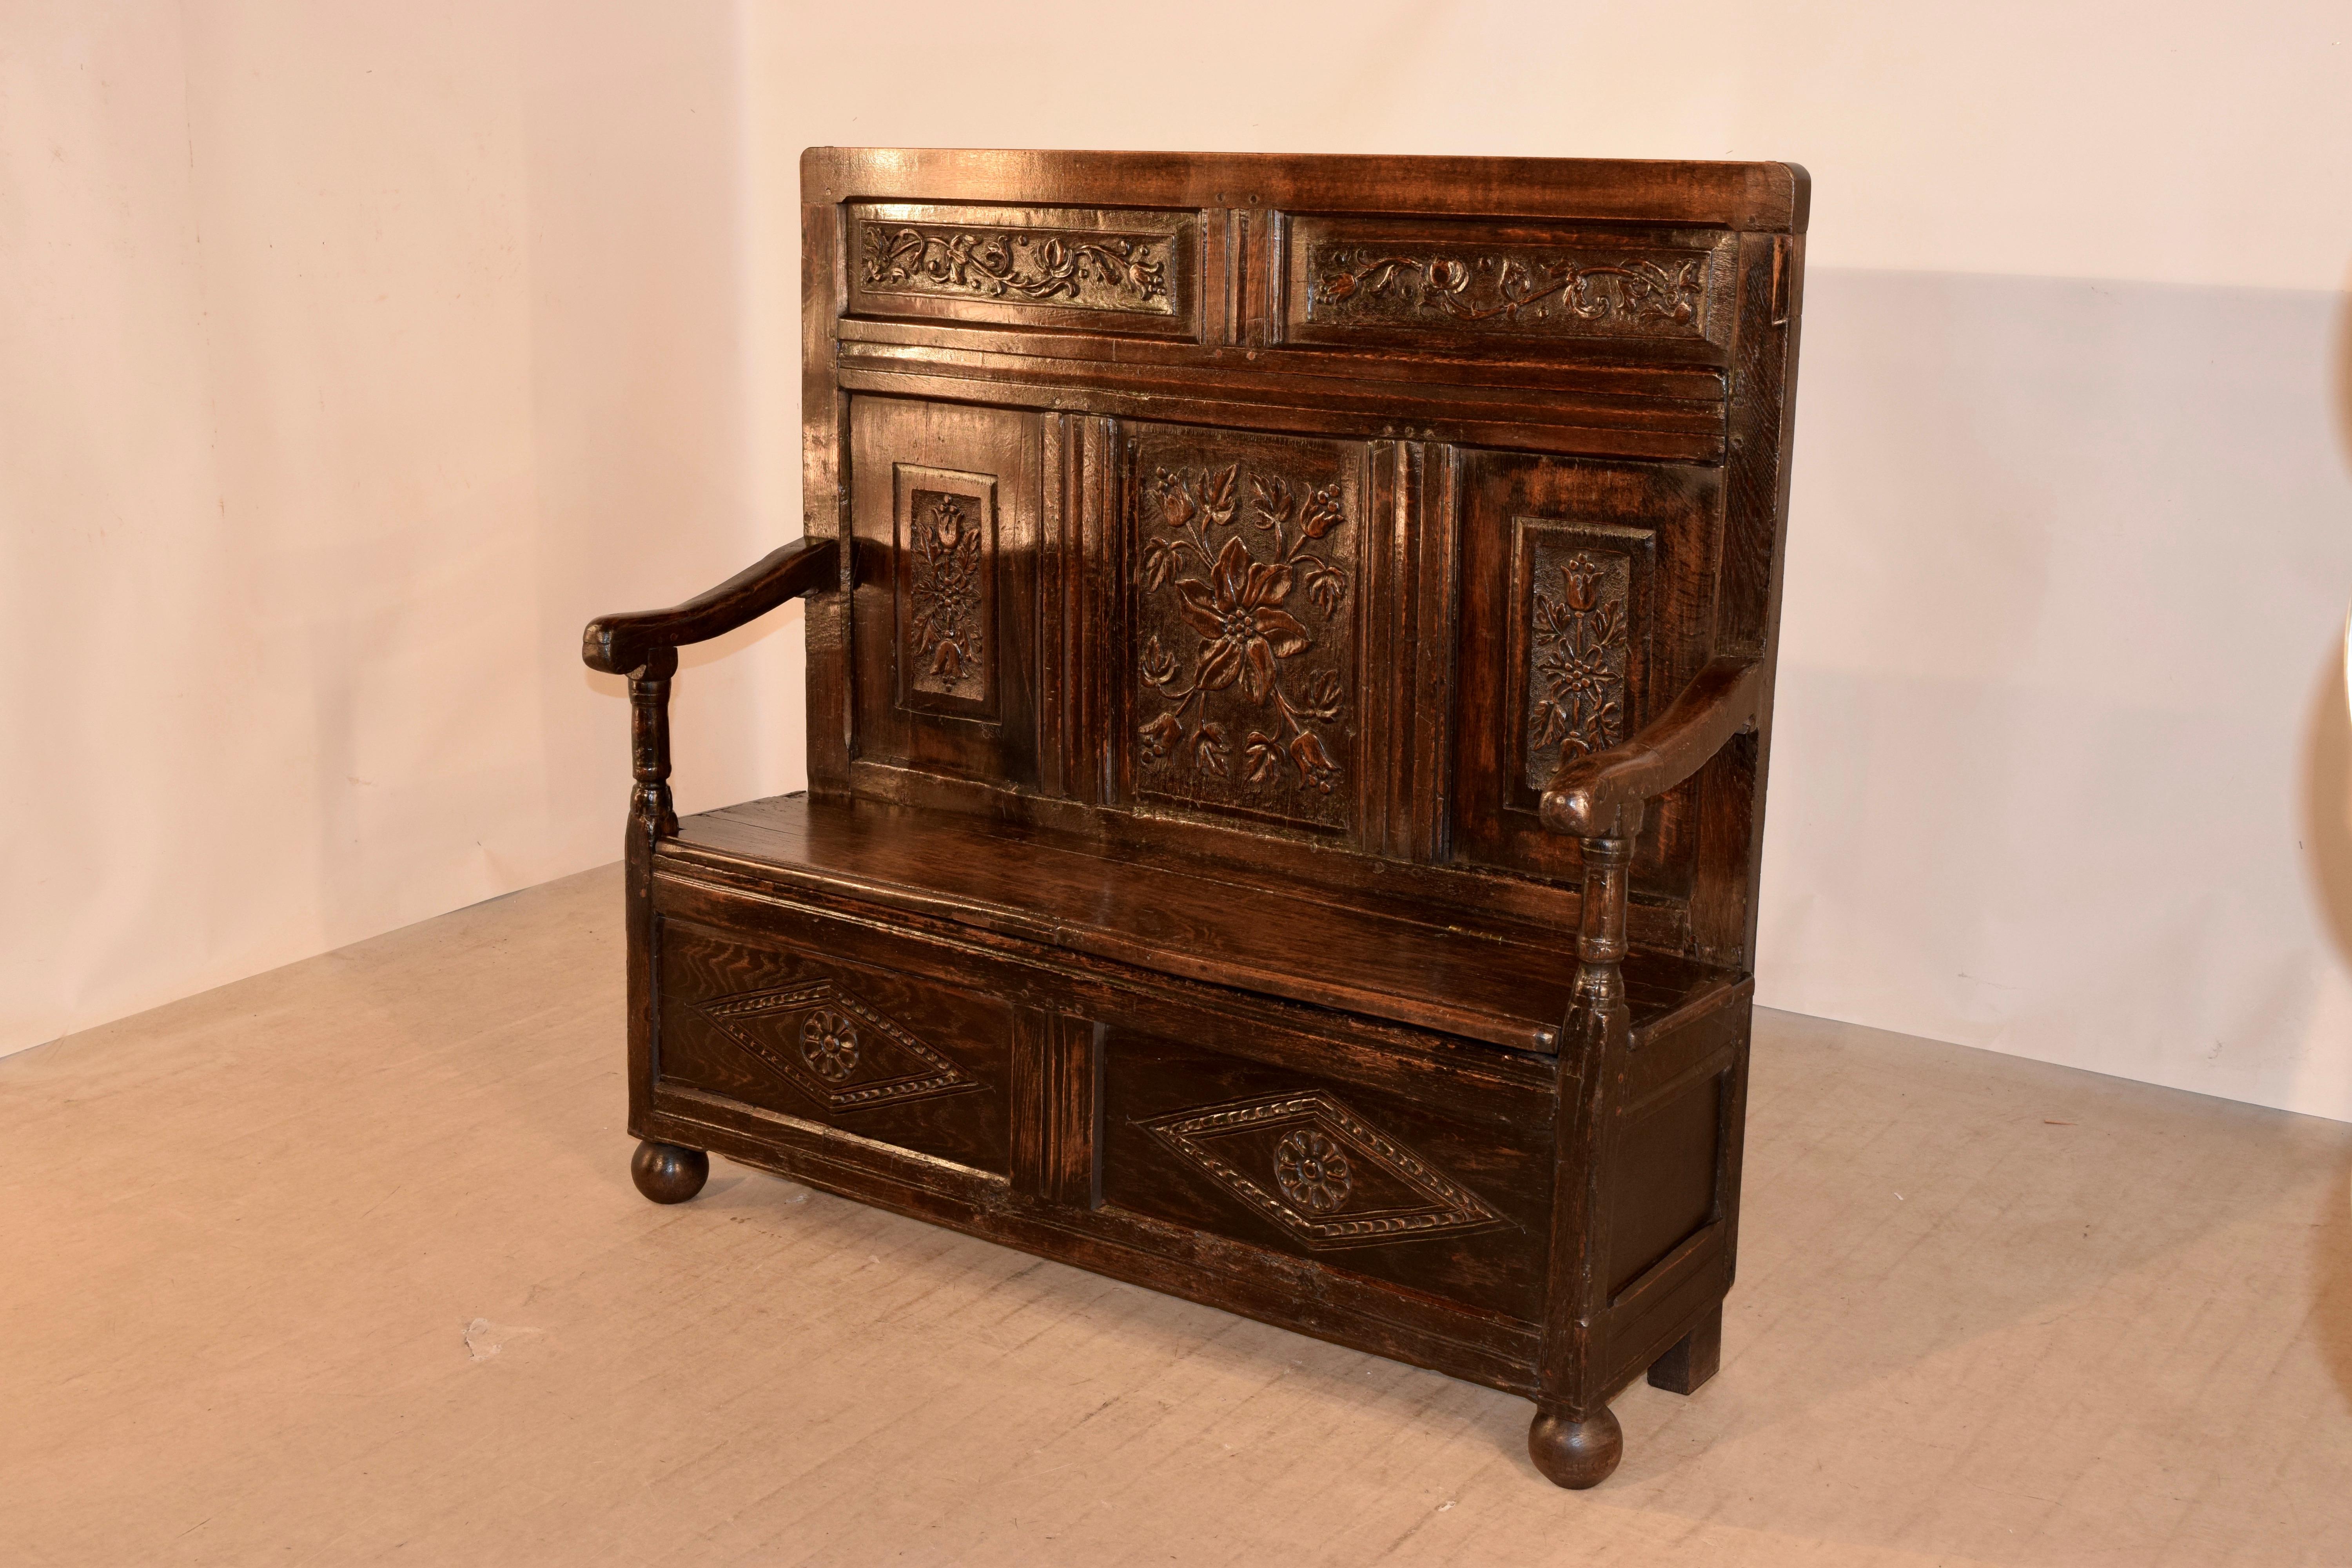 Hand-Carved Early 18th Century English Oak Settle